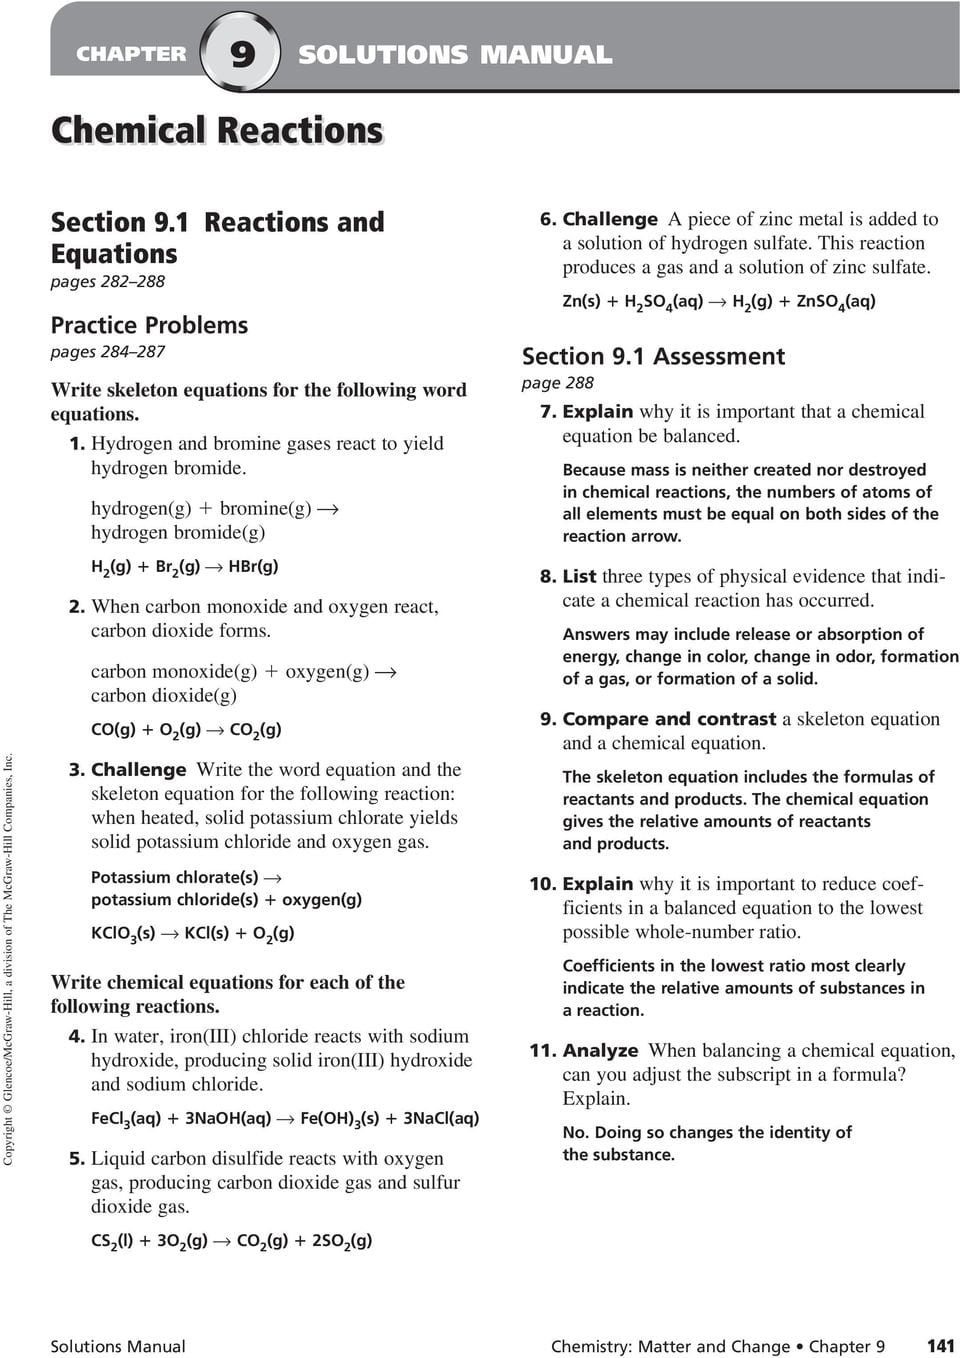 describing-chemical-reactions-worksheet-answers-db-excel